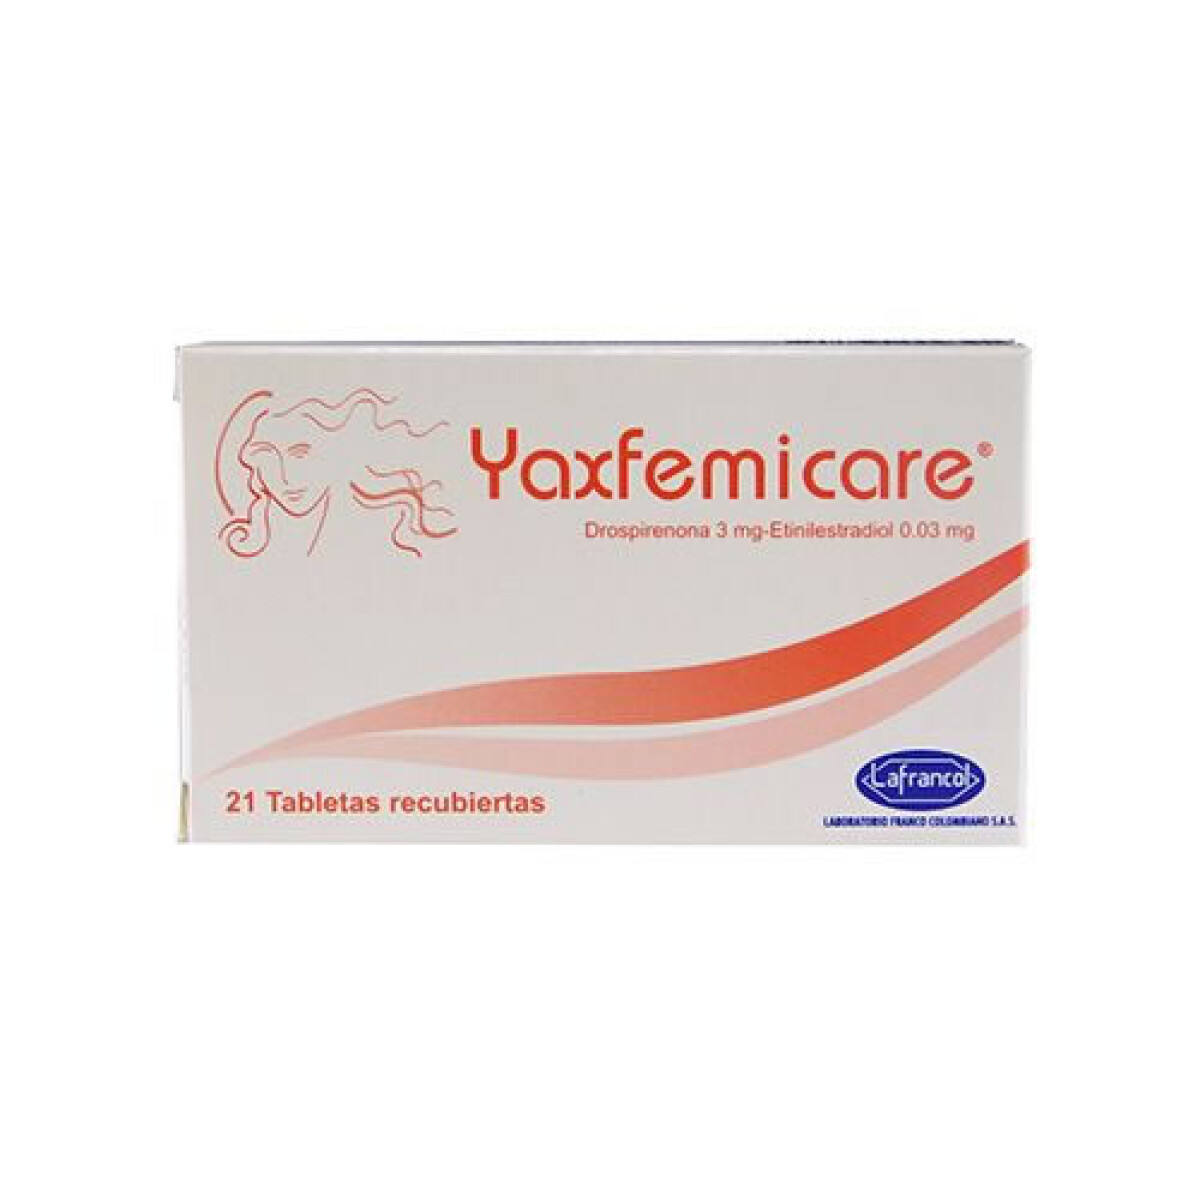 YAXFEMICARE 21 COMPRIMIDOS 